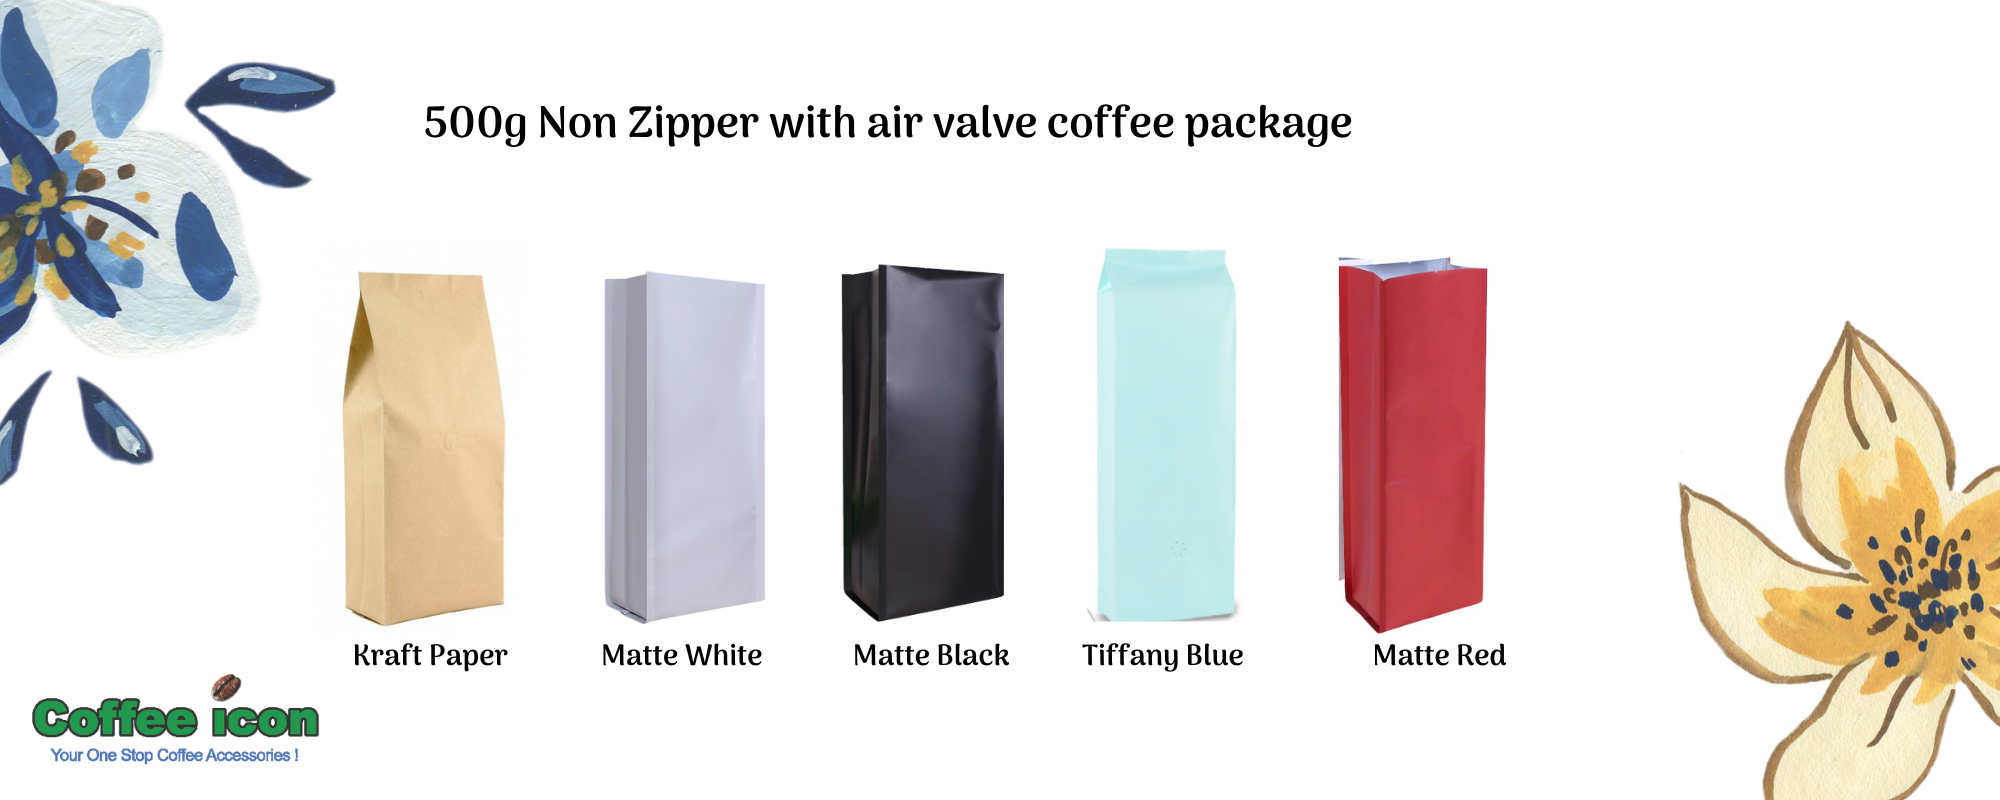 500g Non Zipper with air valve coffee package.png